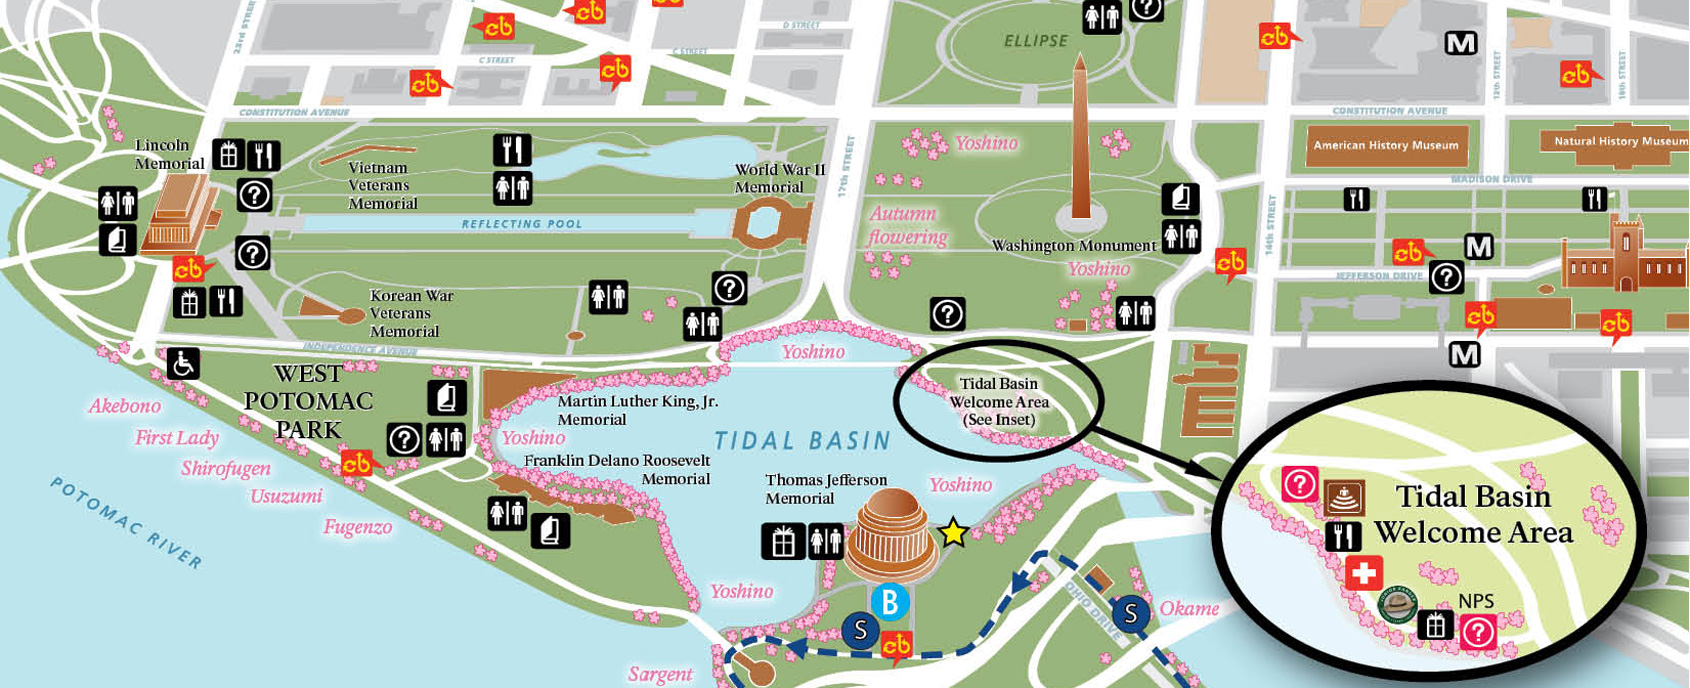 Map image of festival locations